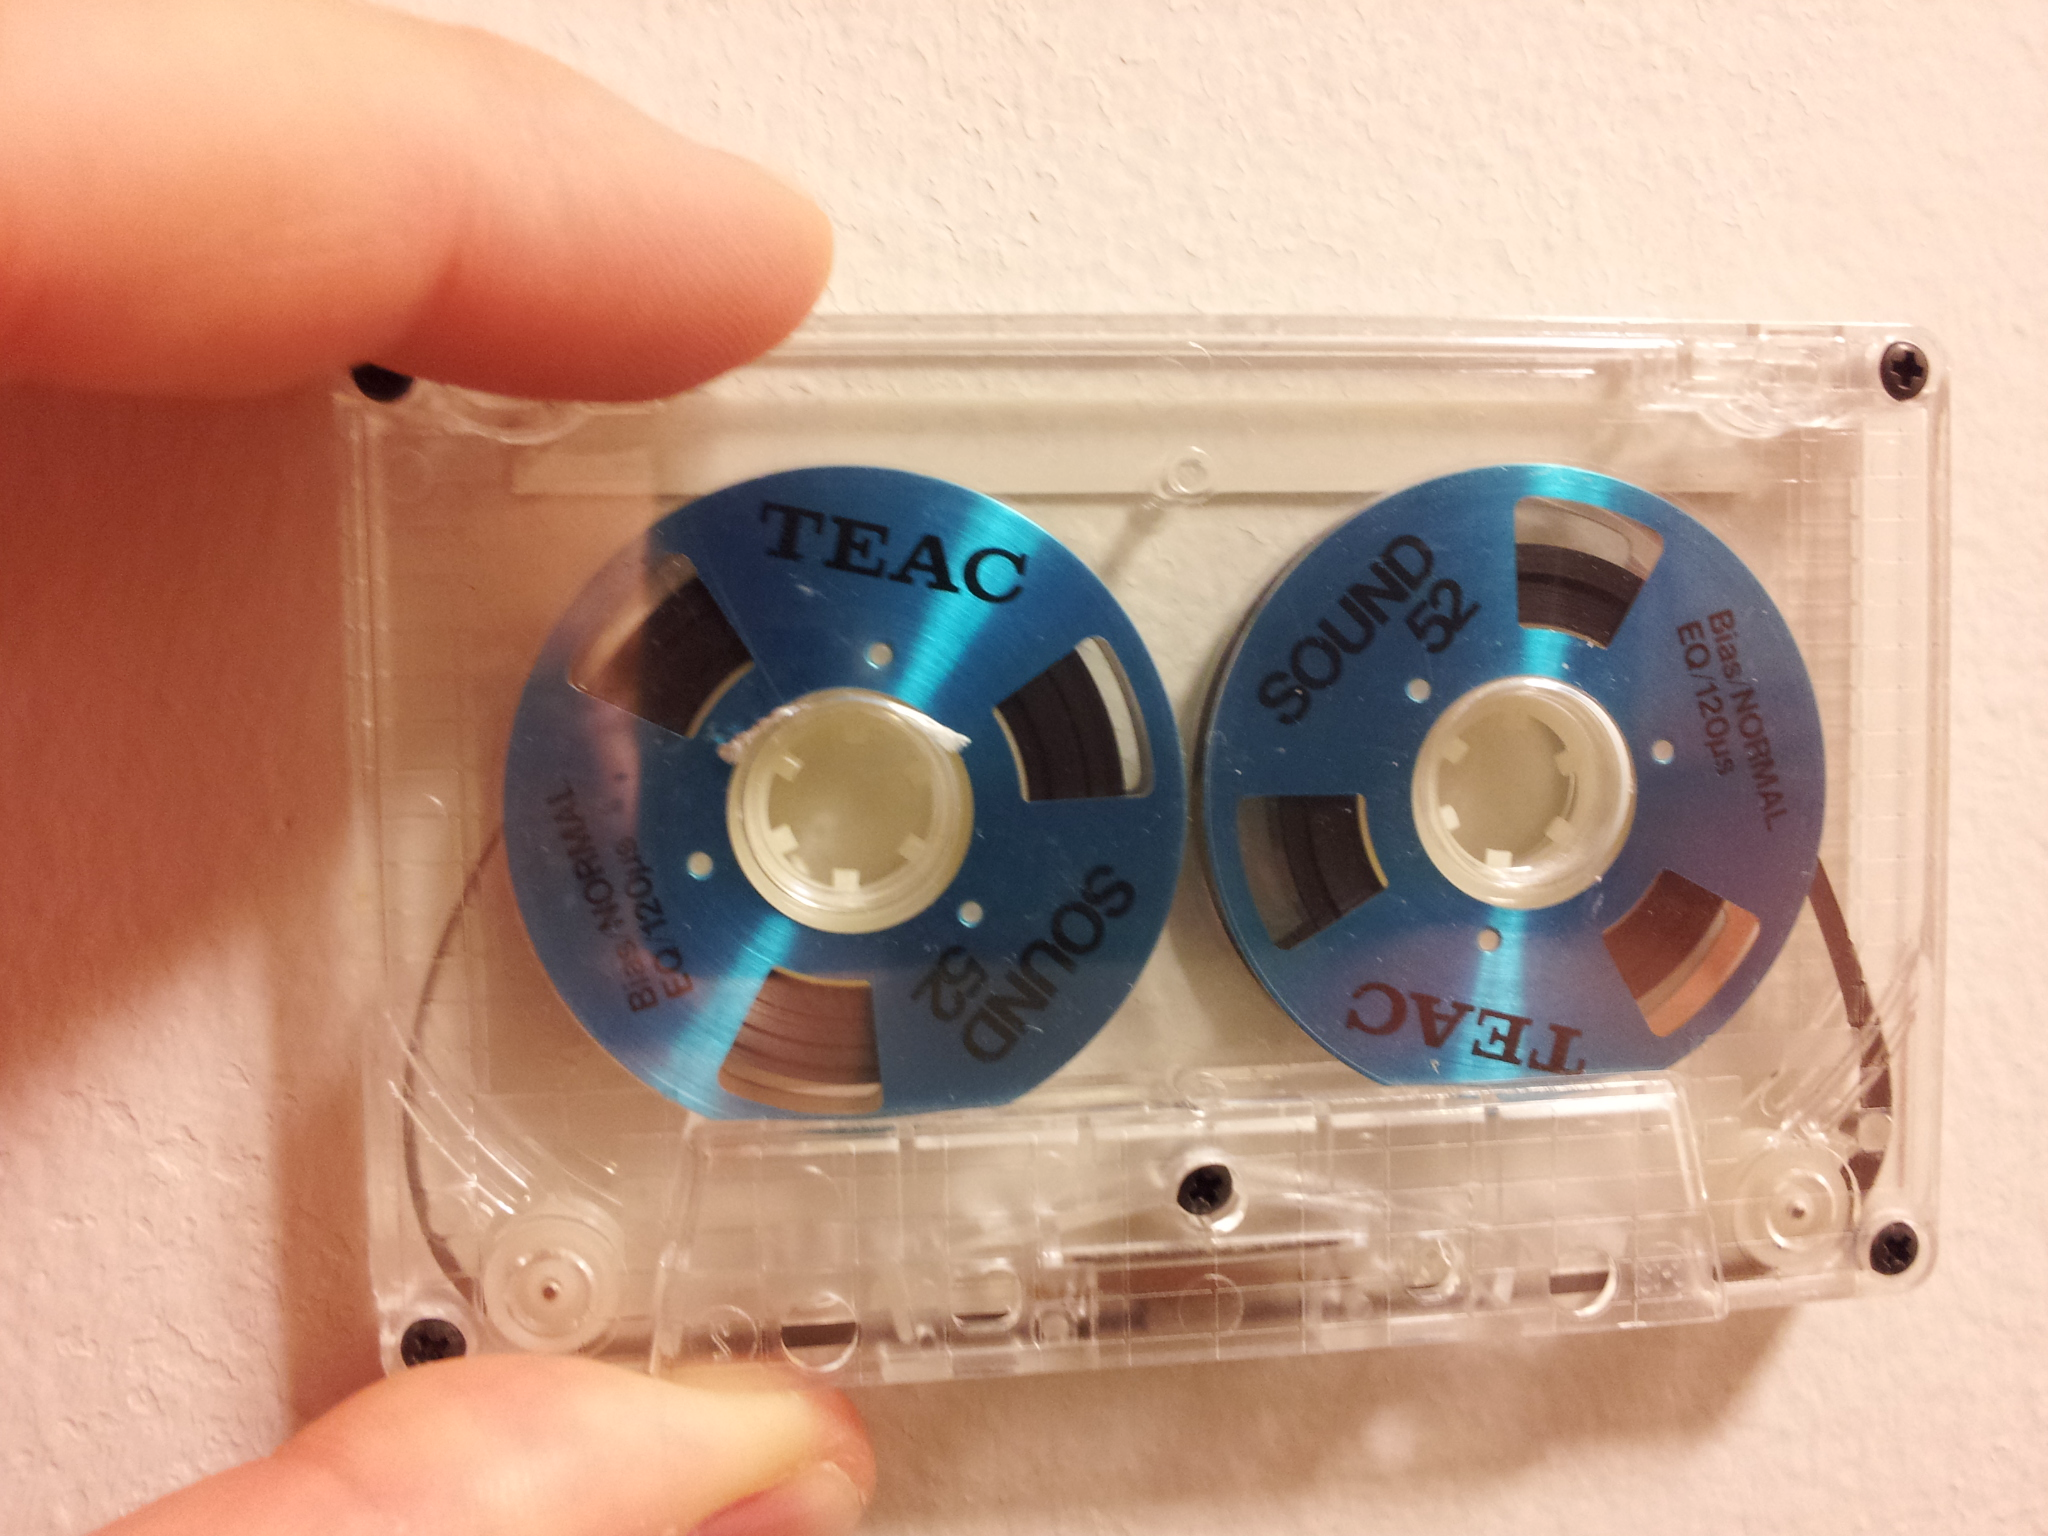 File:TEAC Sound-52 cassette with reels (6125566851).png